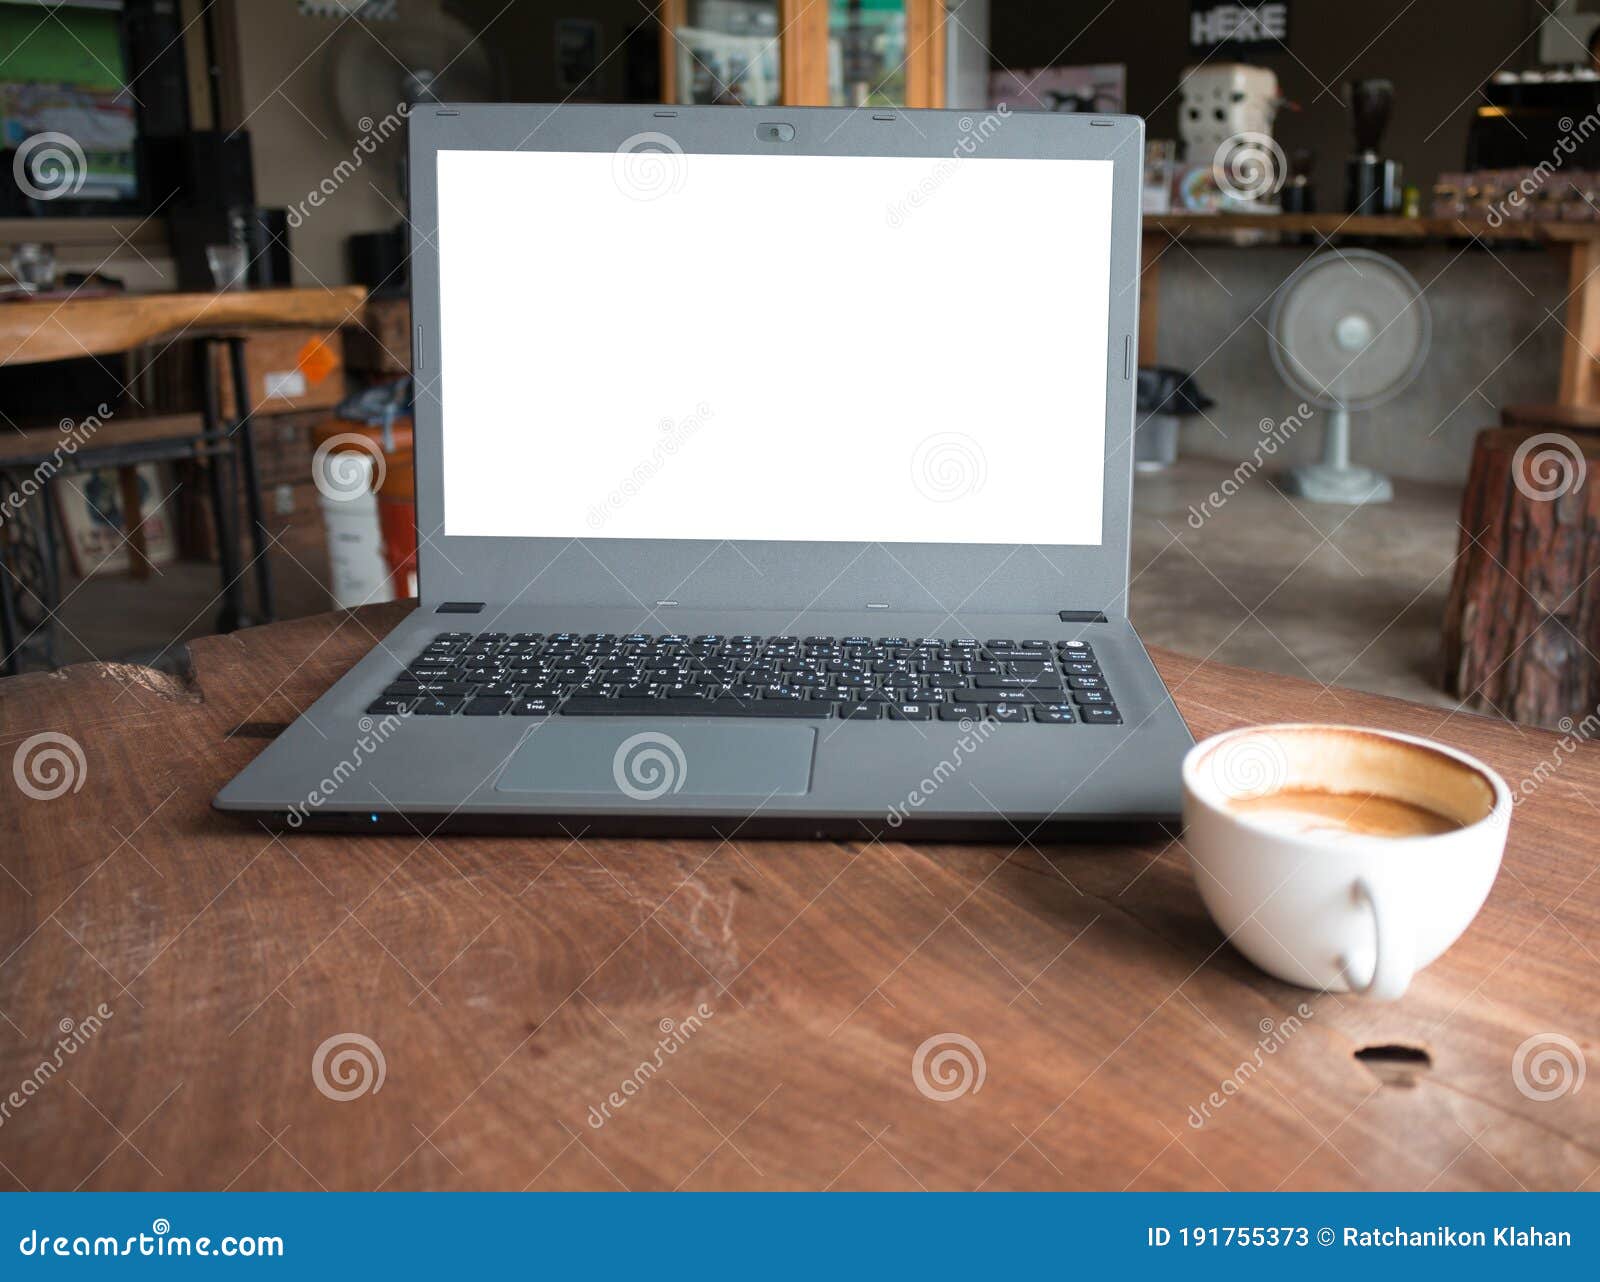 closeup of laptop computer with blank display in coffee shop concept image made advertised product.